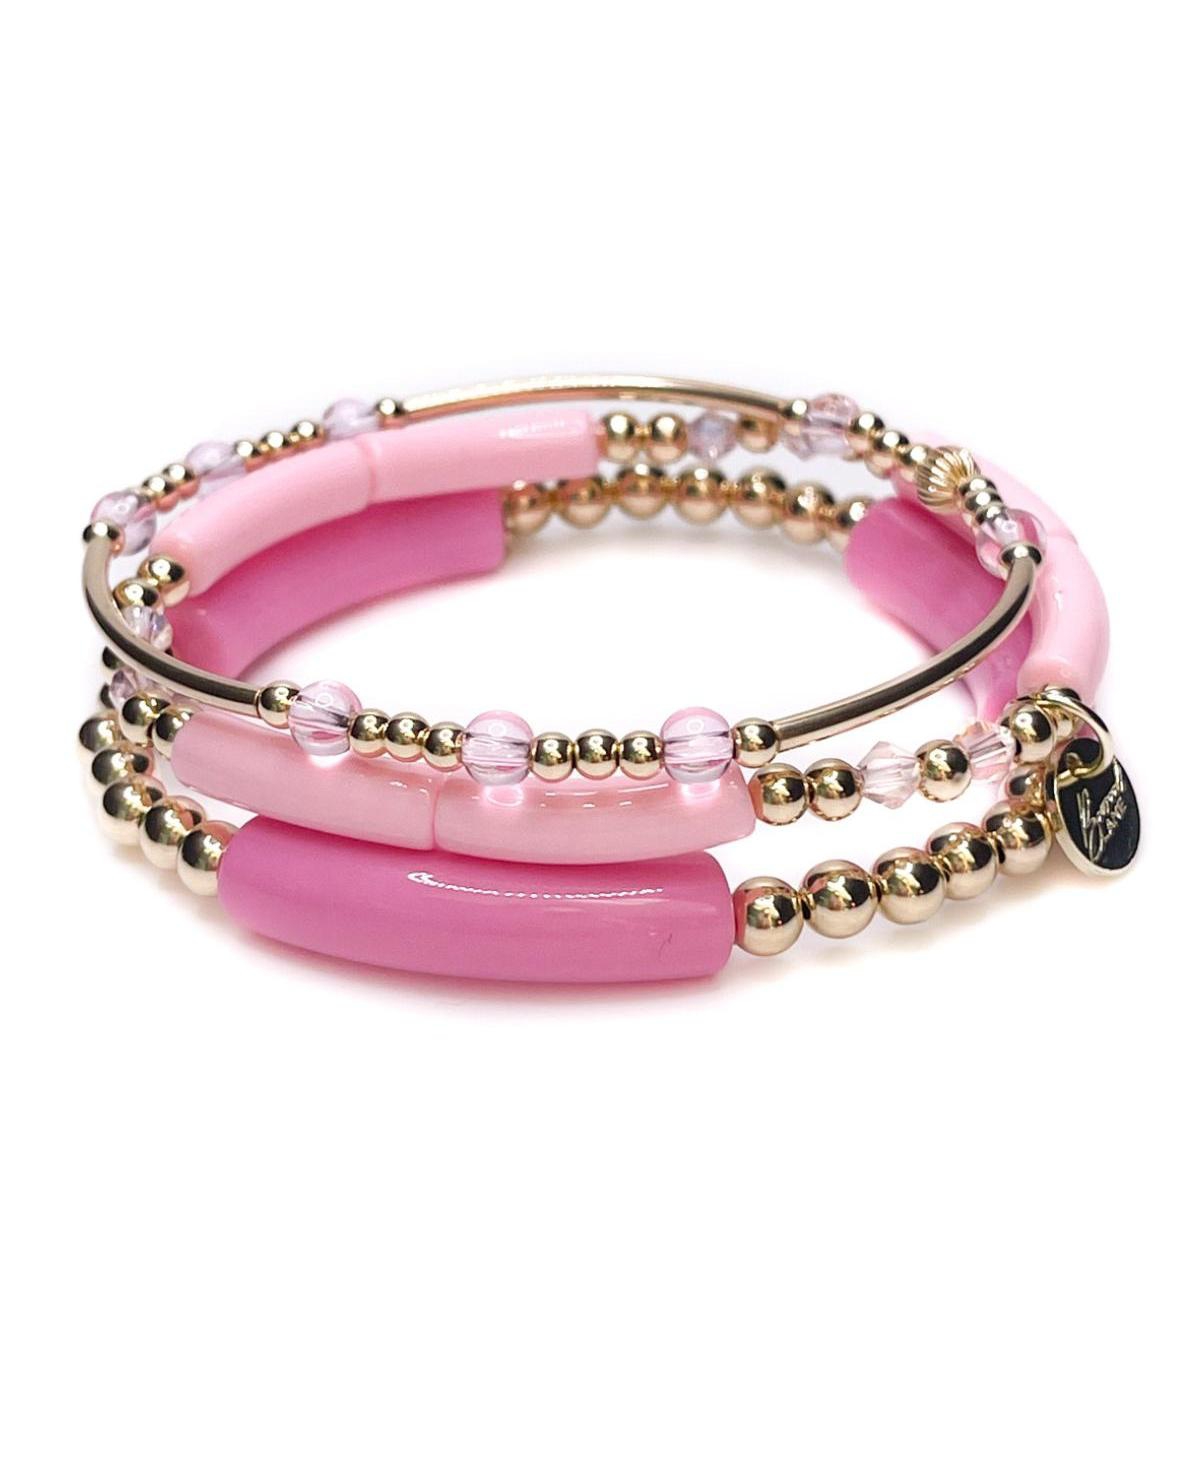 Bowood Lane Non-tarnishing Gold Filled Ball , Gold Tube, And Acrylic Stretch Bracelet Stack, 3 Pieces In Pink